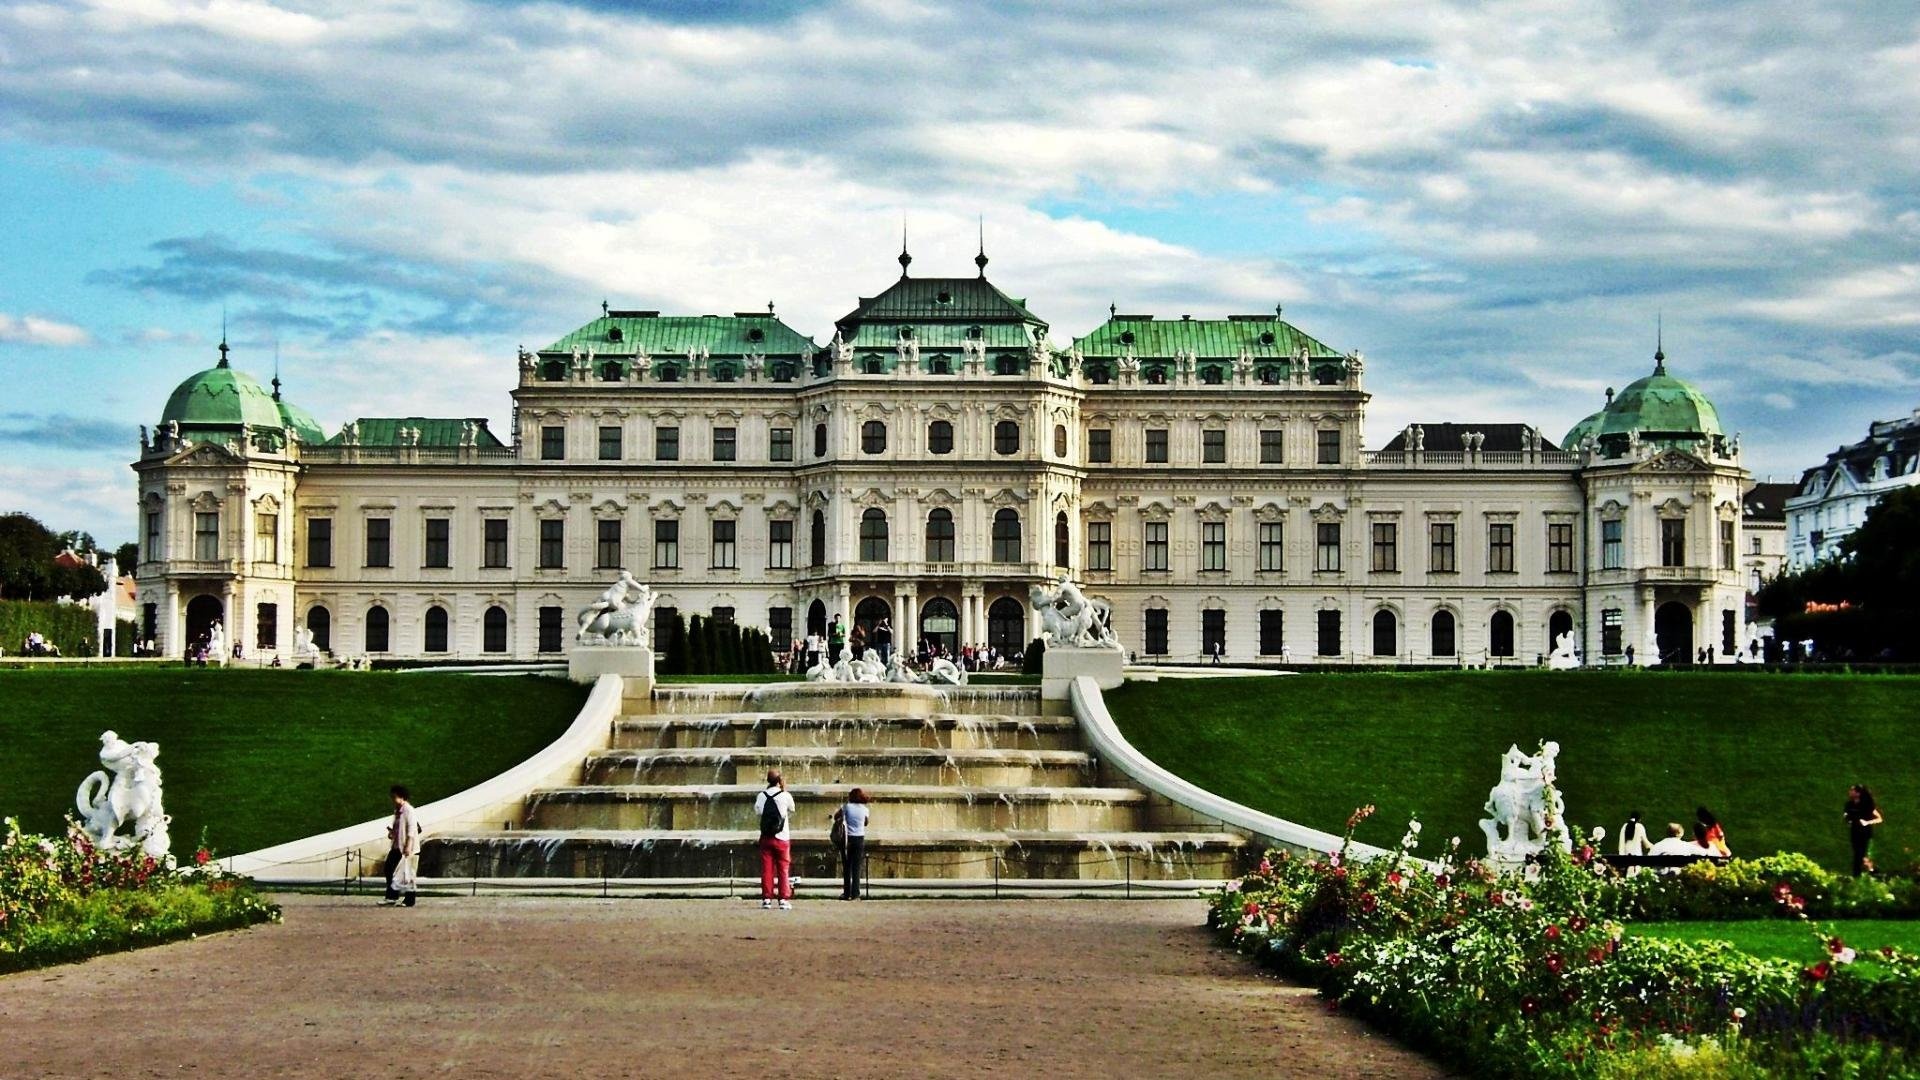 Austria: A home to numerous palaces, including Schonbrunn Palace in Vienna. 1920x1080 Full HD Wallpaper.